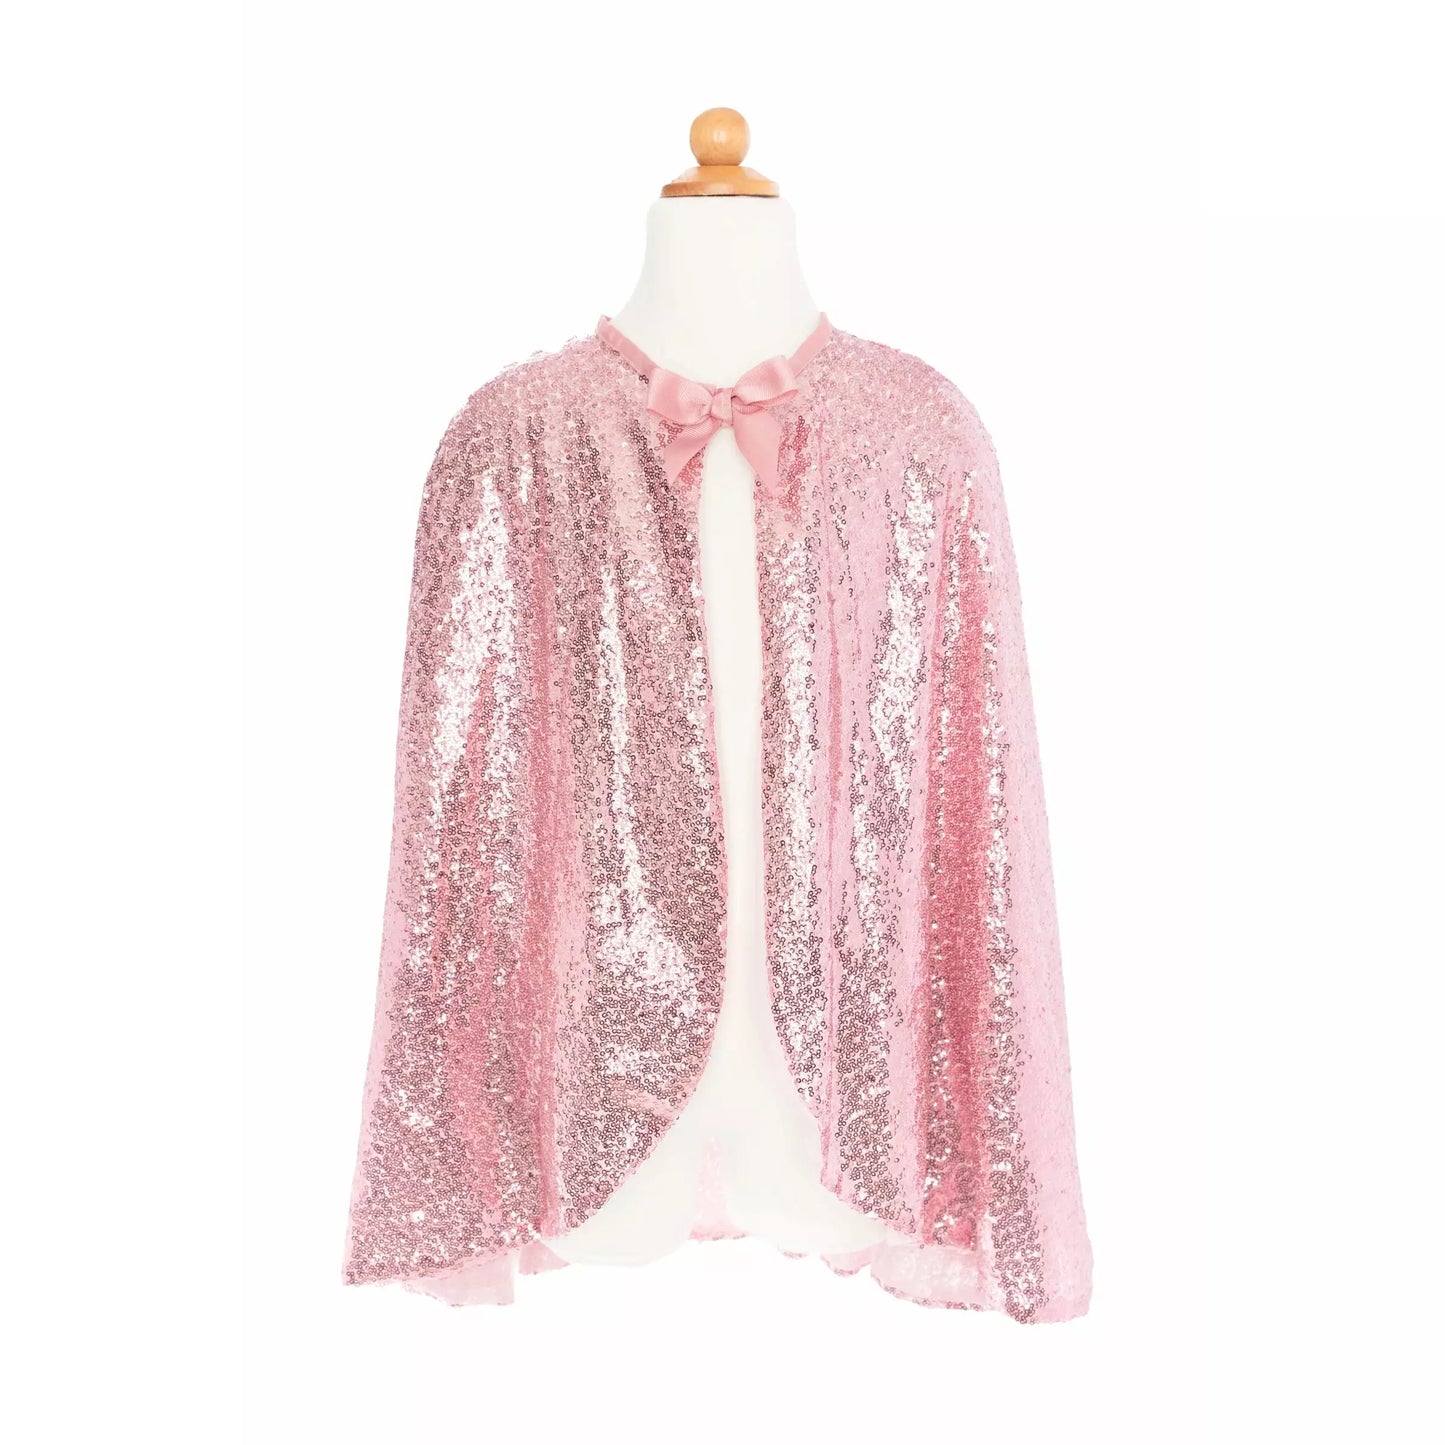 Great Pretenders Precious Pink Sequins Cape Size 5 - 6